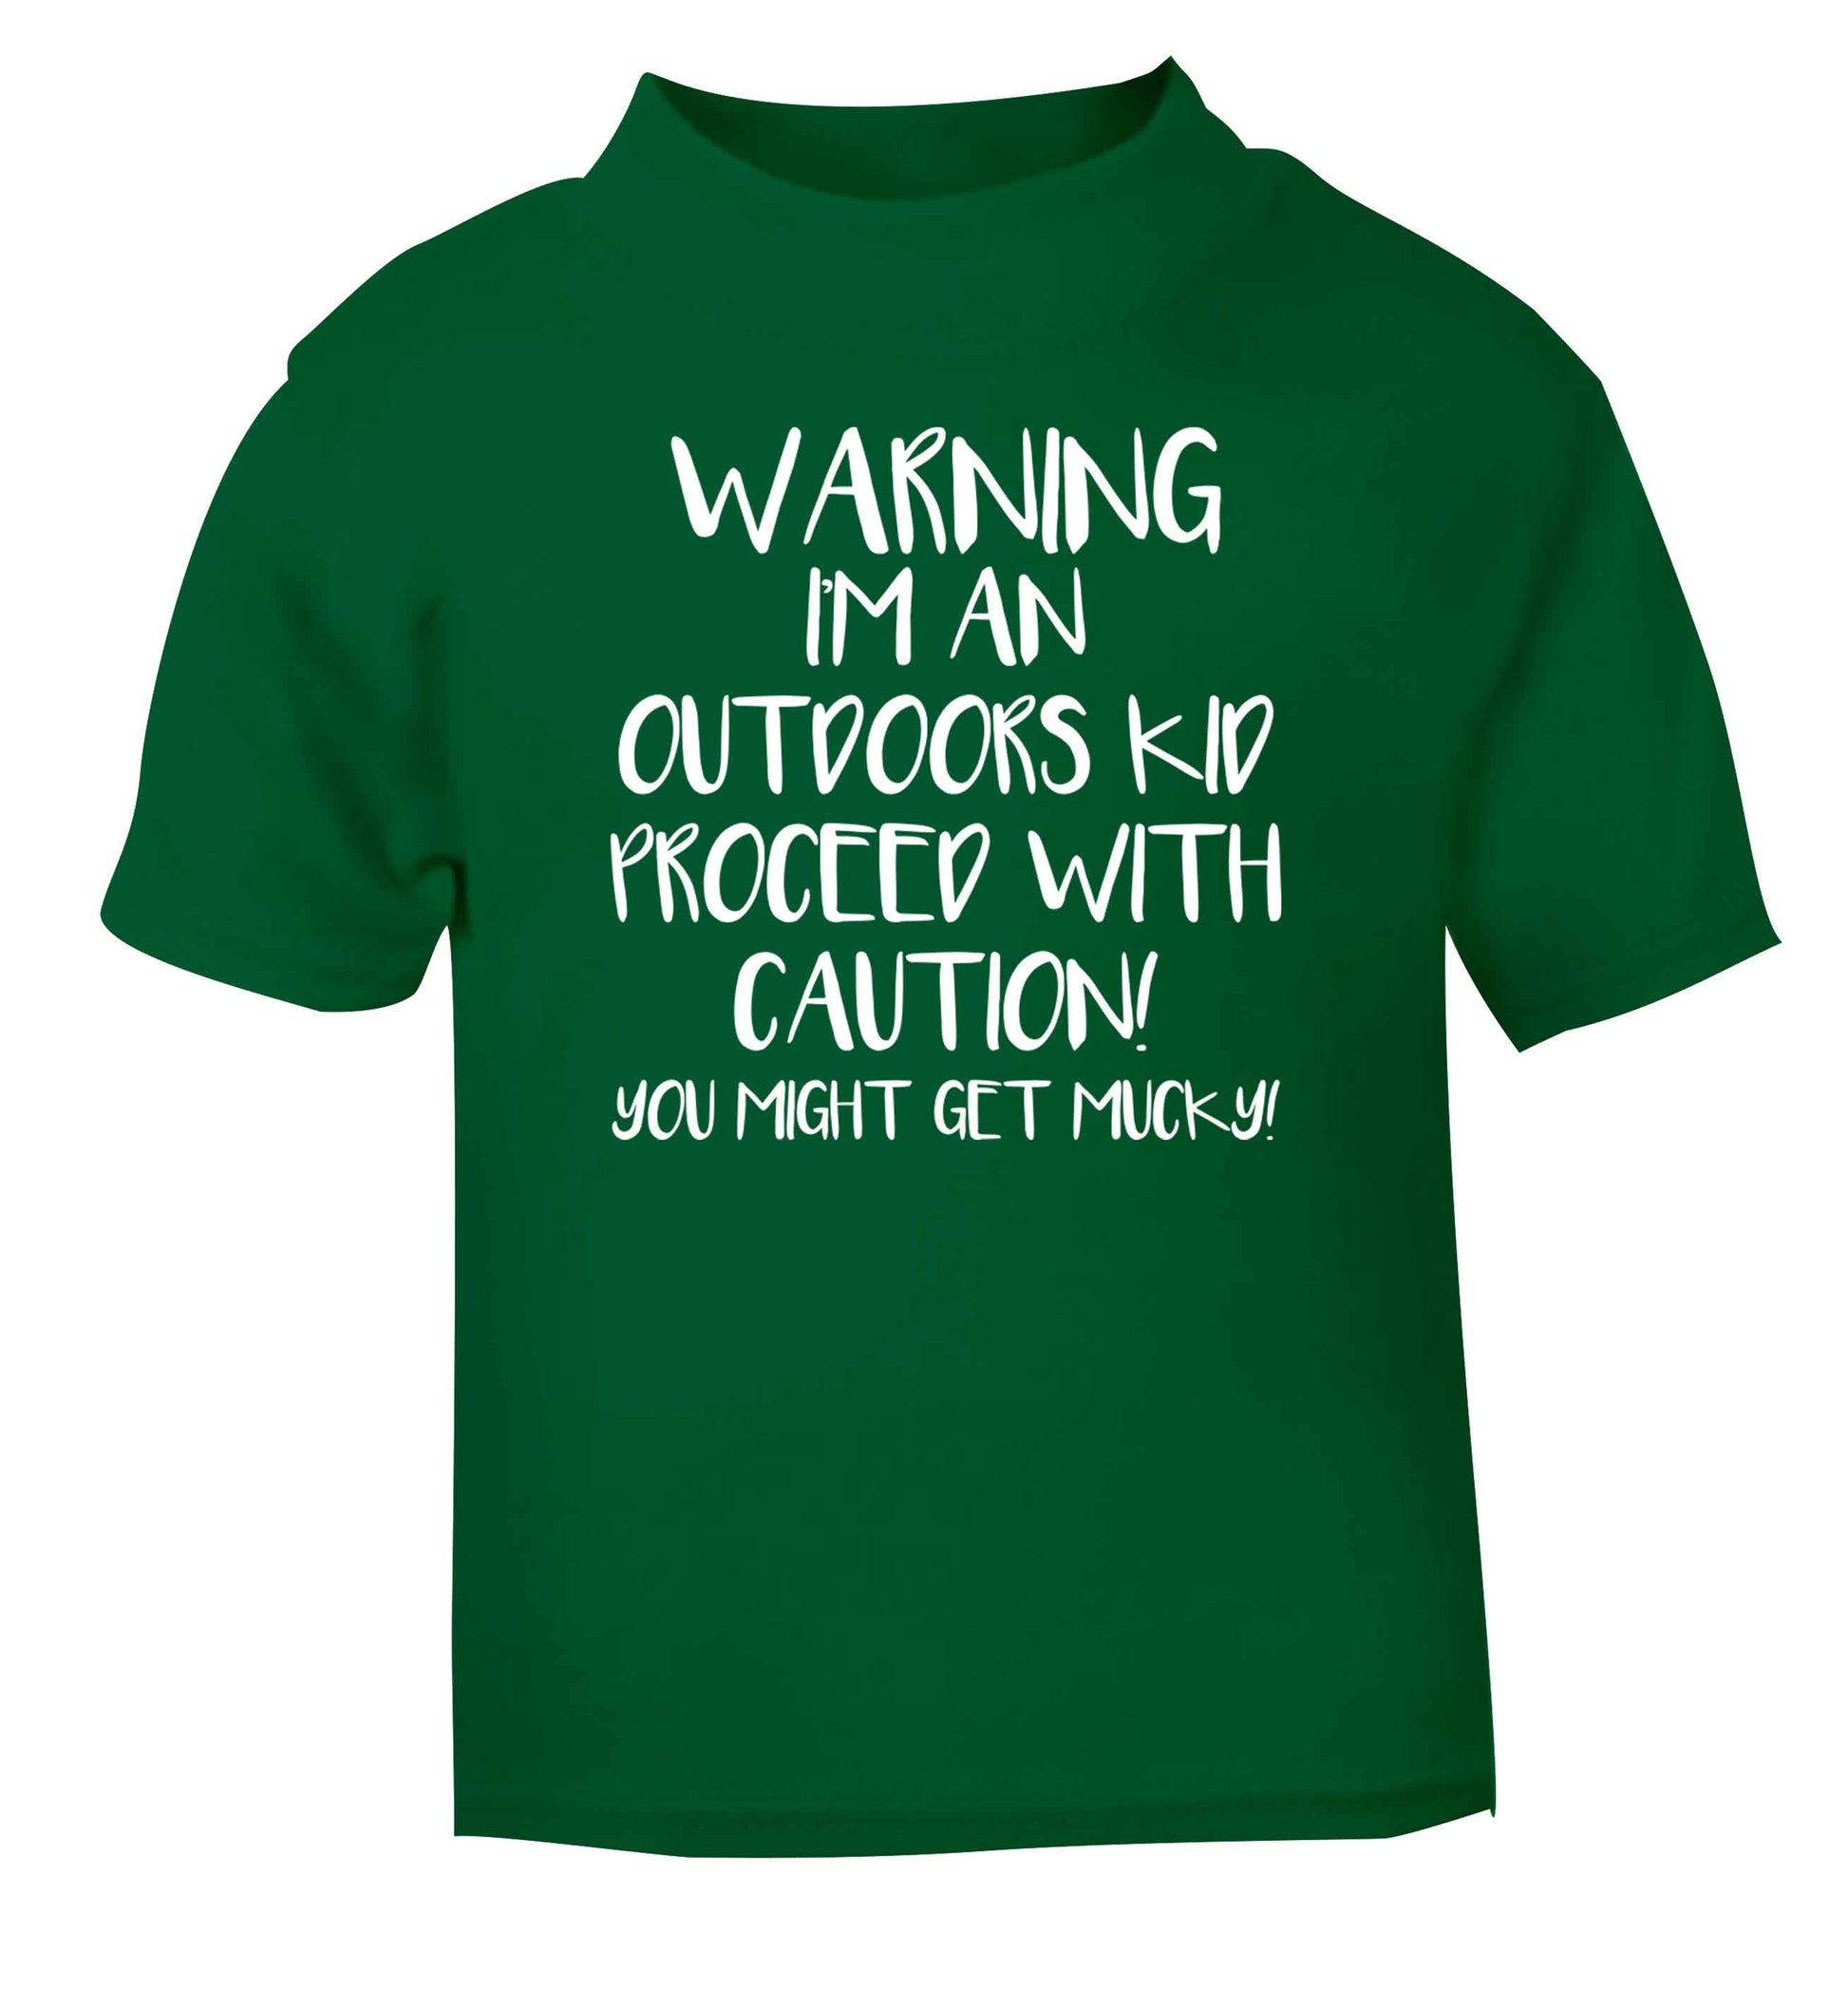 Warning I'm an outdoors kid! Proceed with caution you might get mucky green Baby Toddler Tshirt 2 Years